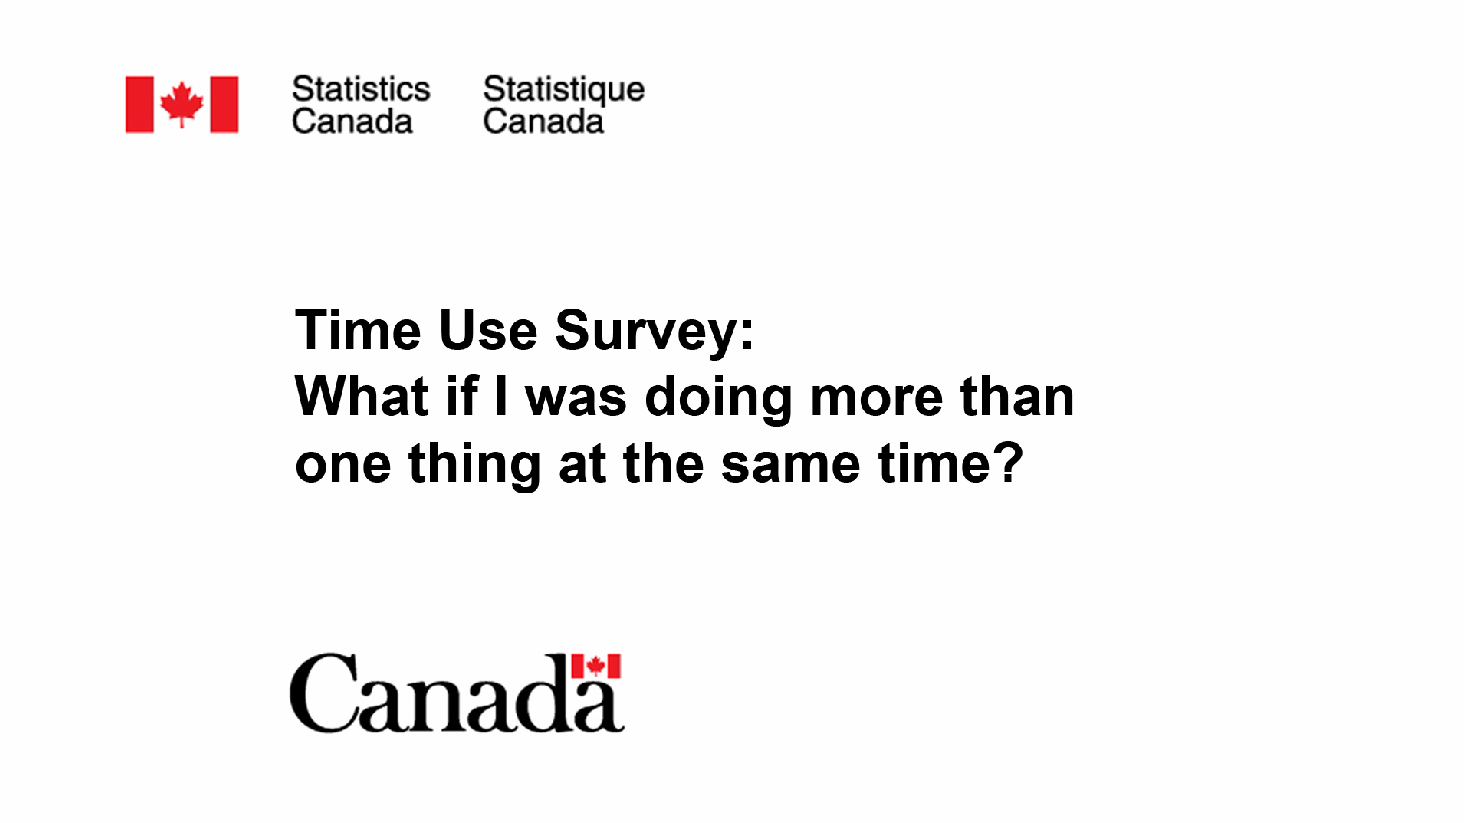 Time Use Survey: What if I was doing more than one activity at the same time?